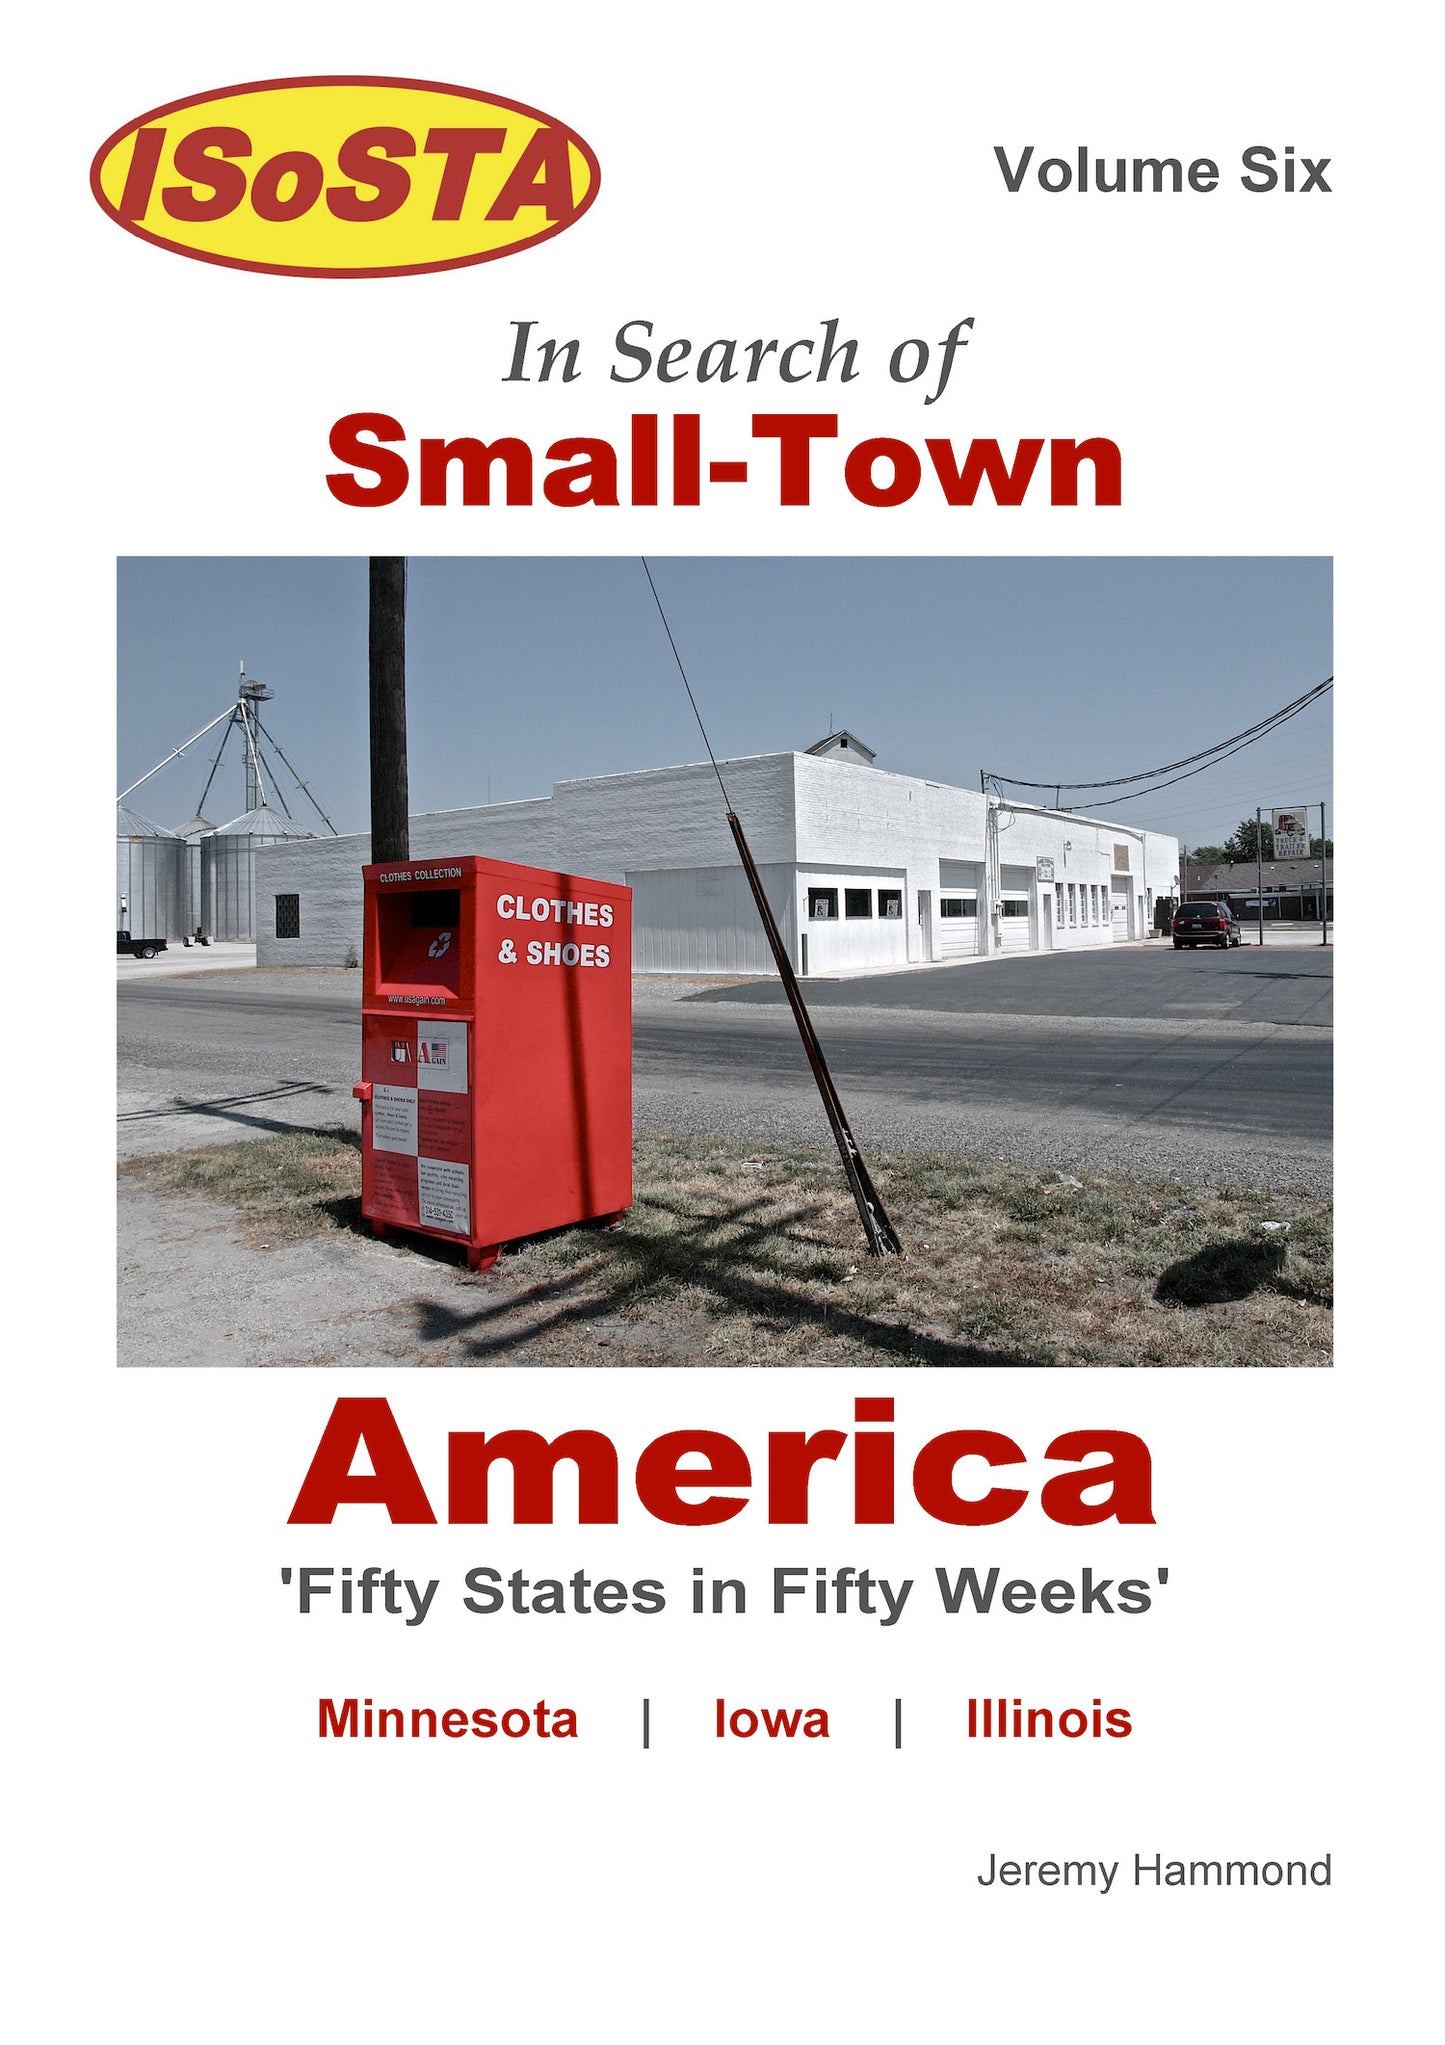 In Search of Small-Town America: Volume 6